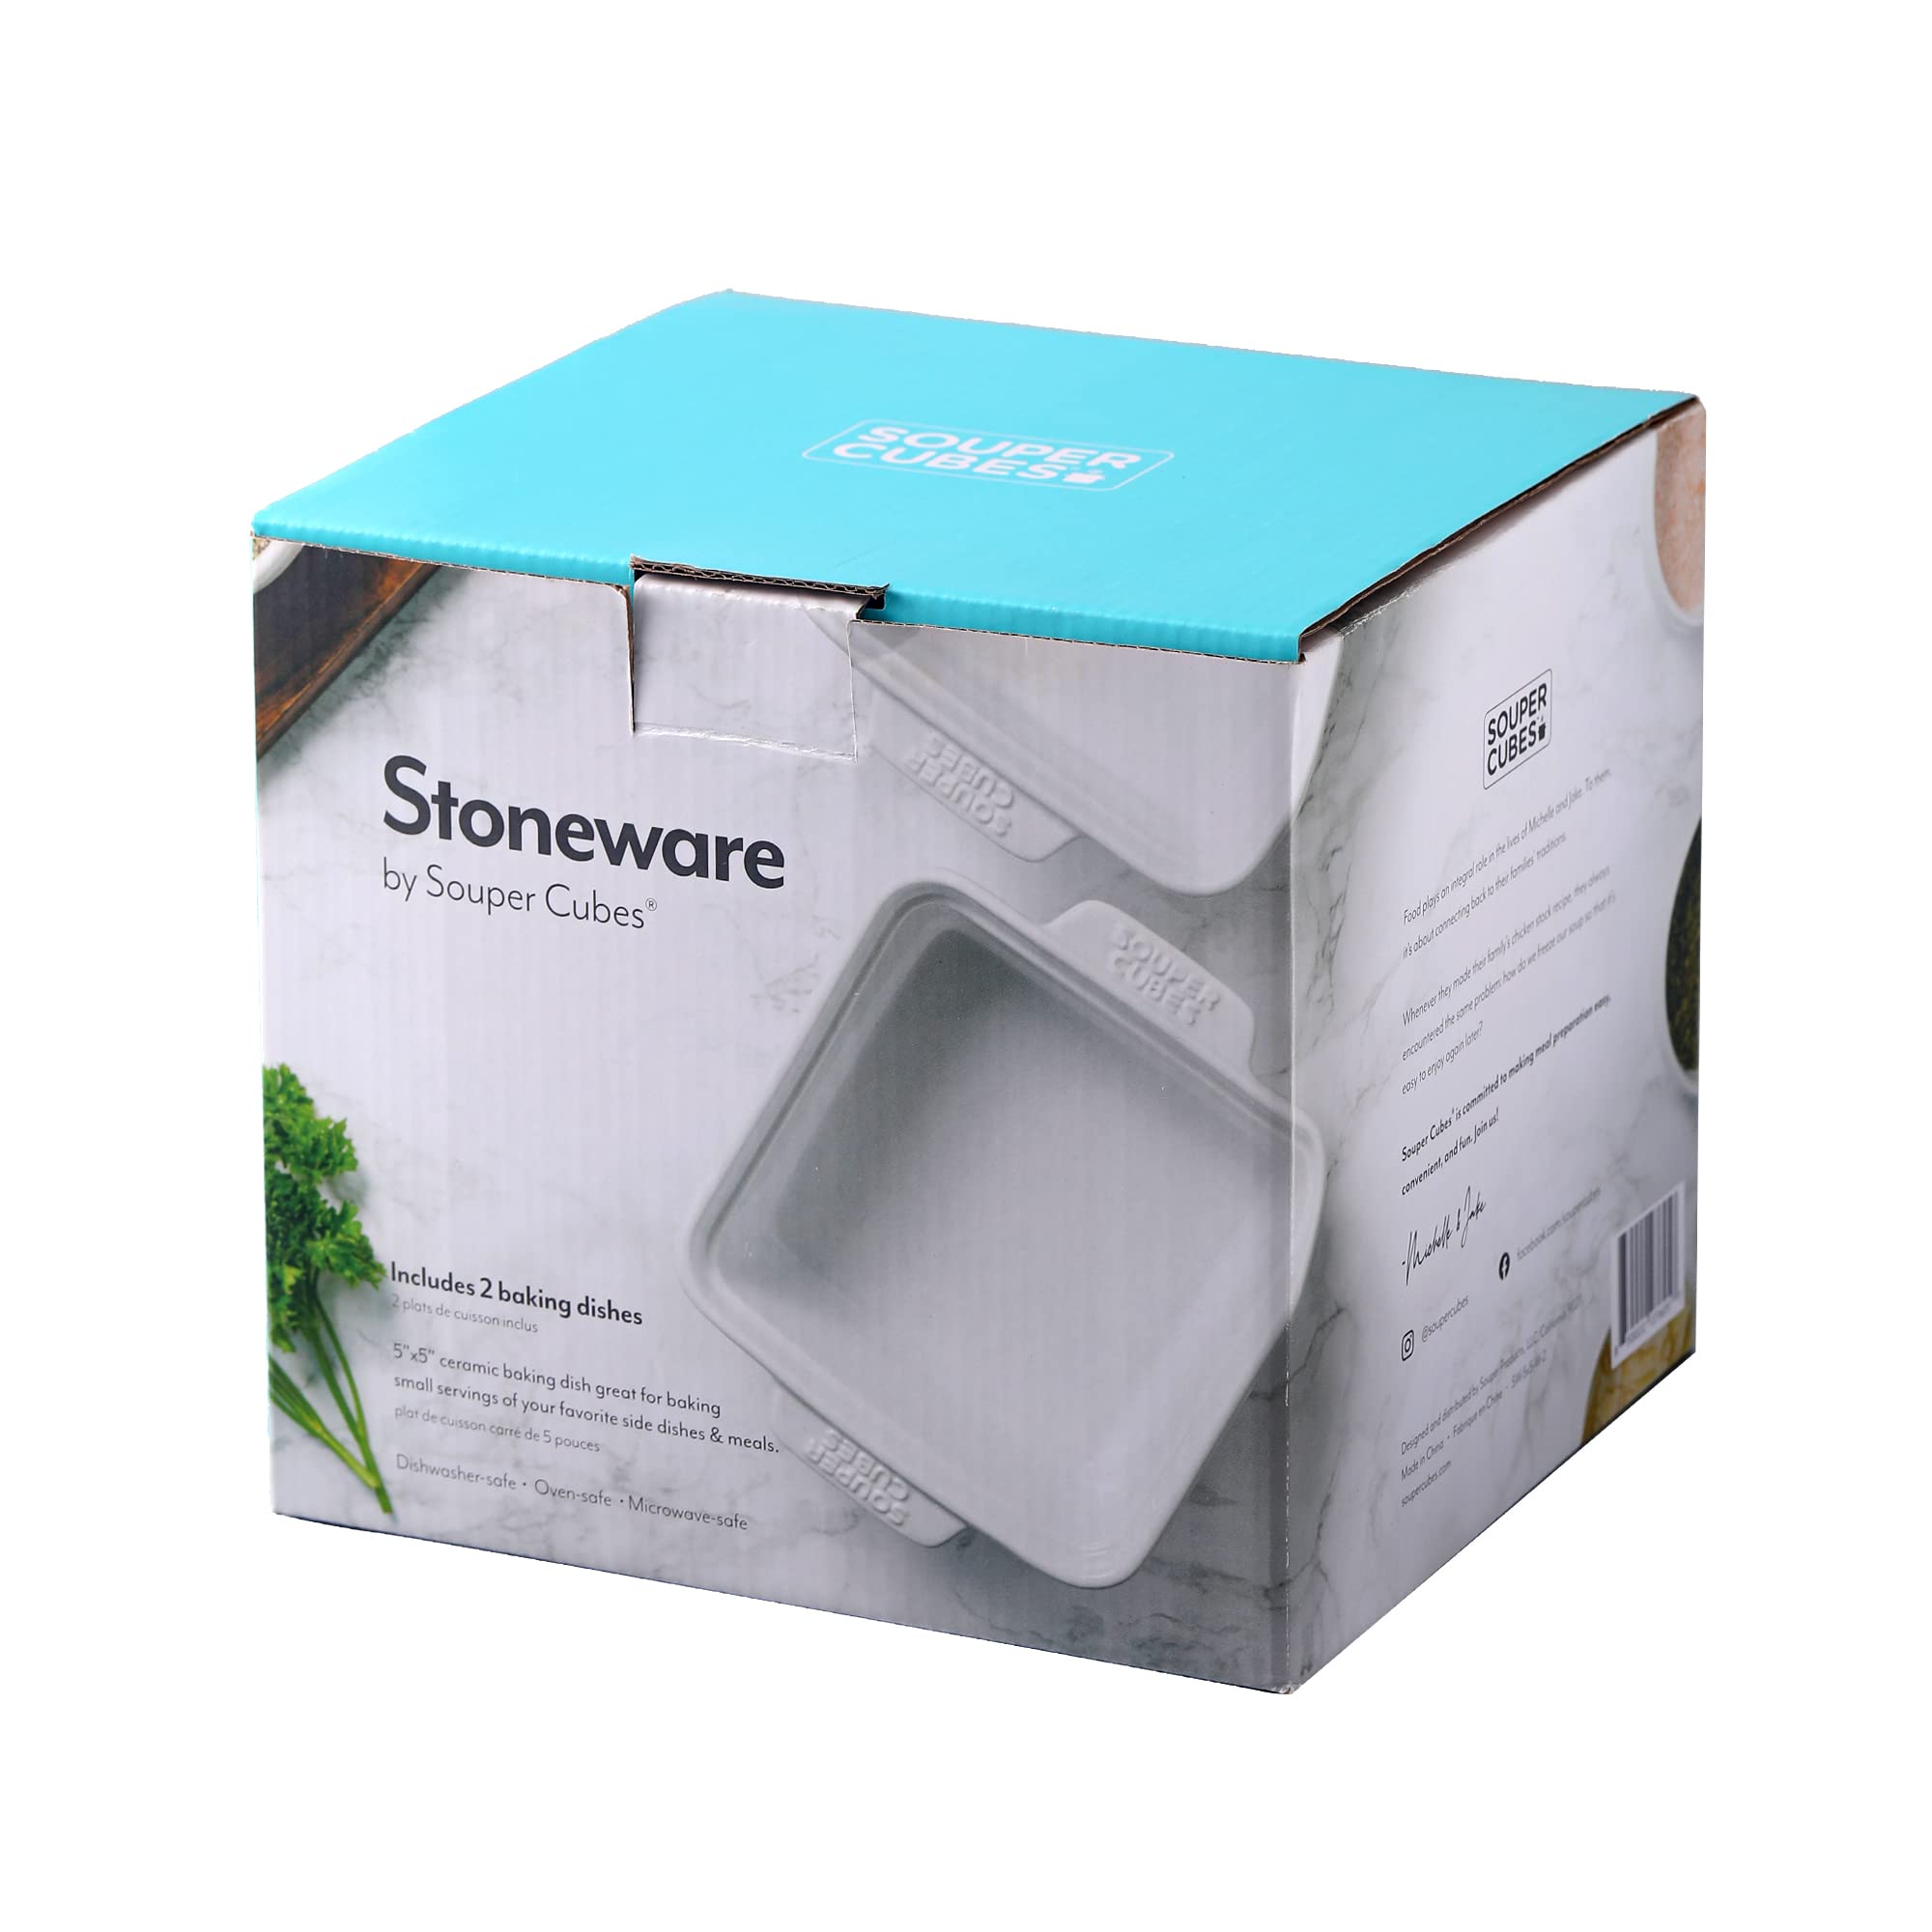 Stoneware by Souper Cubes 5 inch square baking dish, set of two, individual portion baking dish 5 inch x 5 inch, White